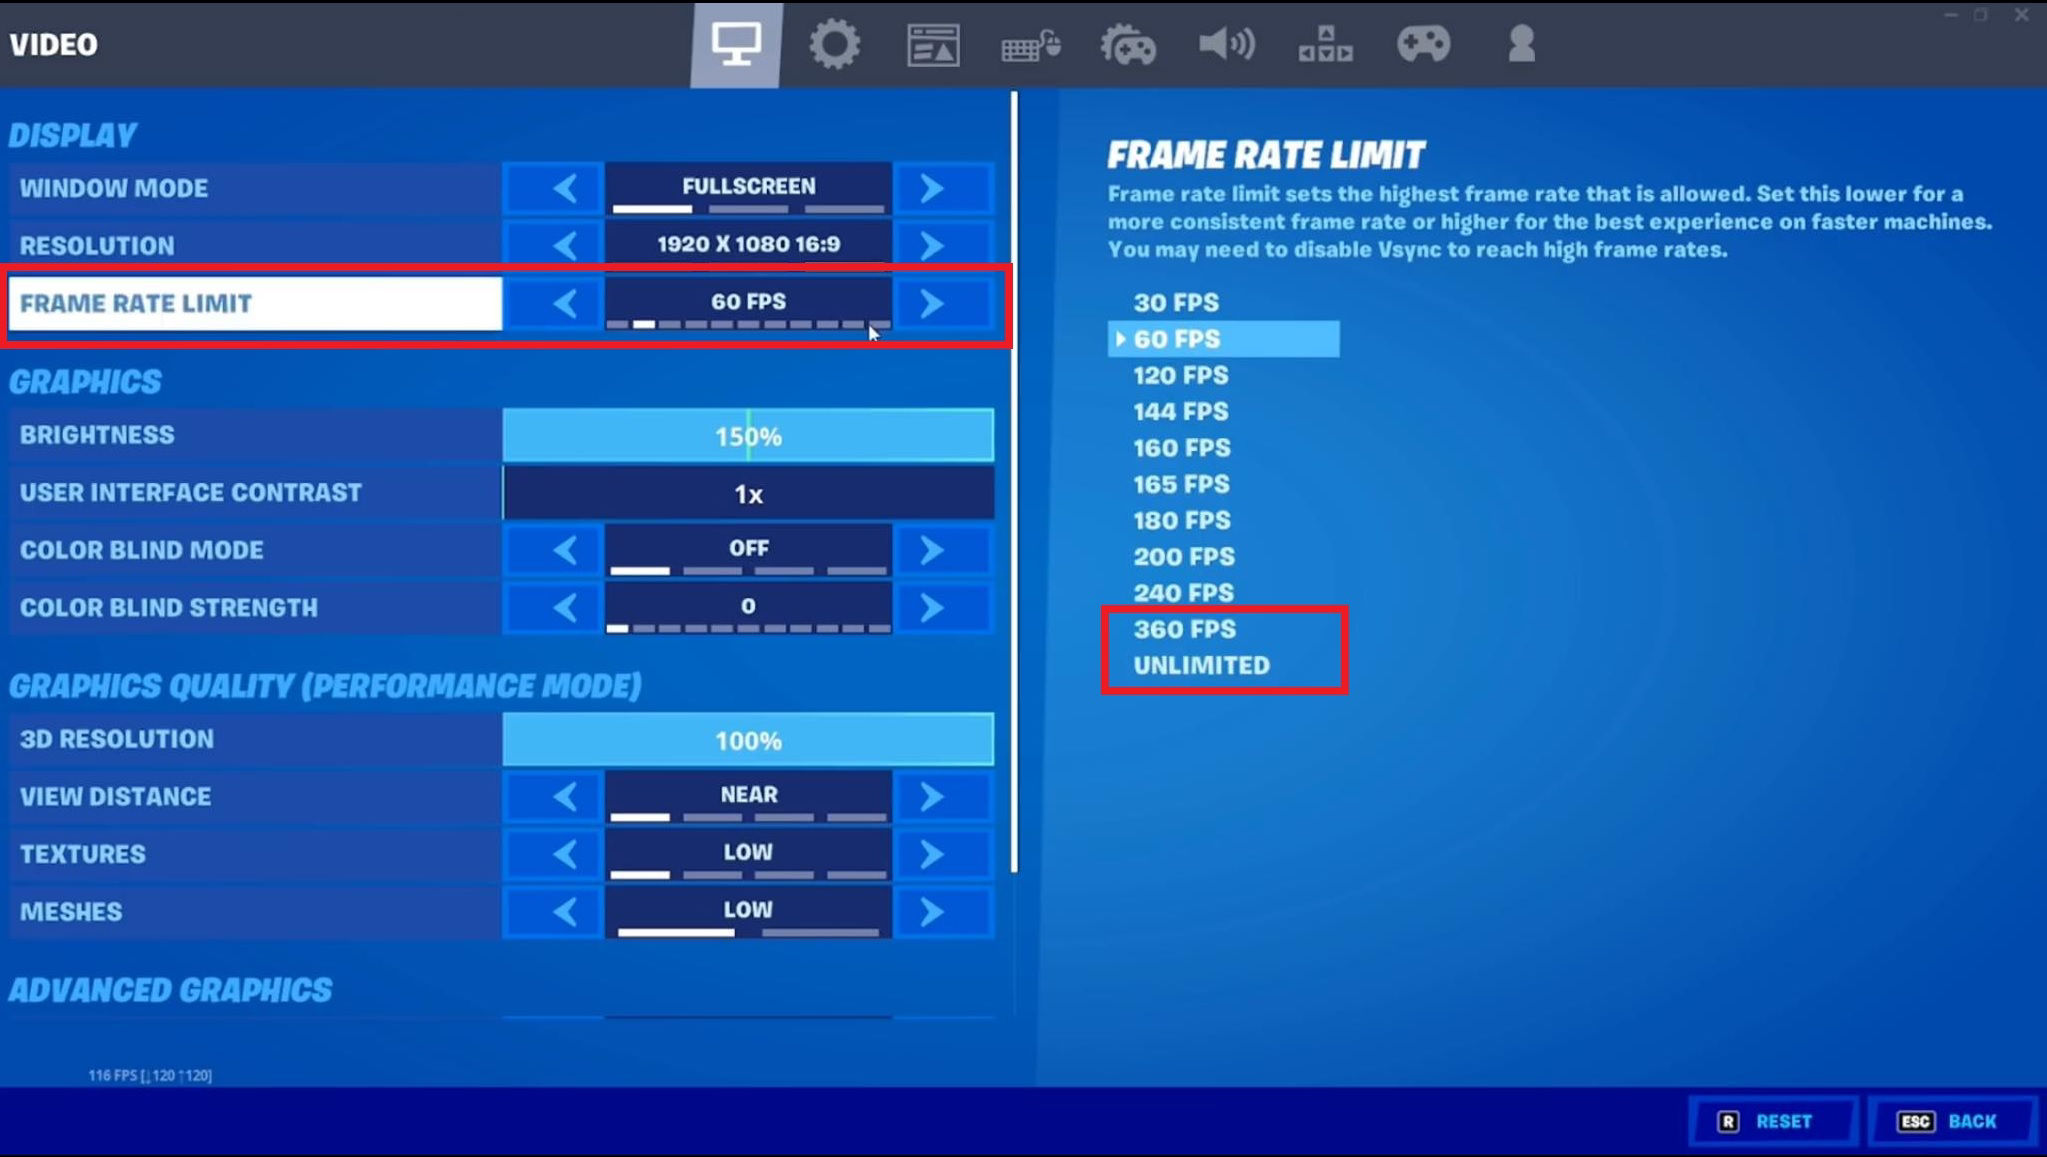 Does FPS have a limit?